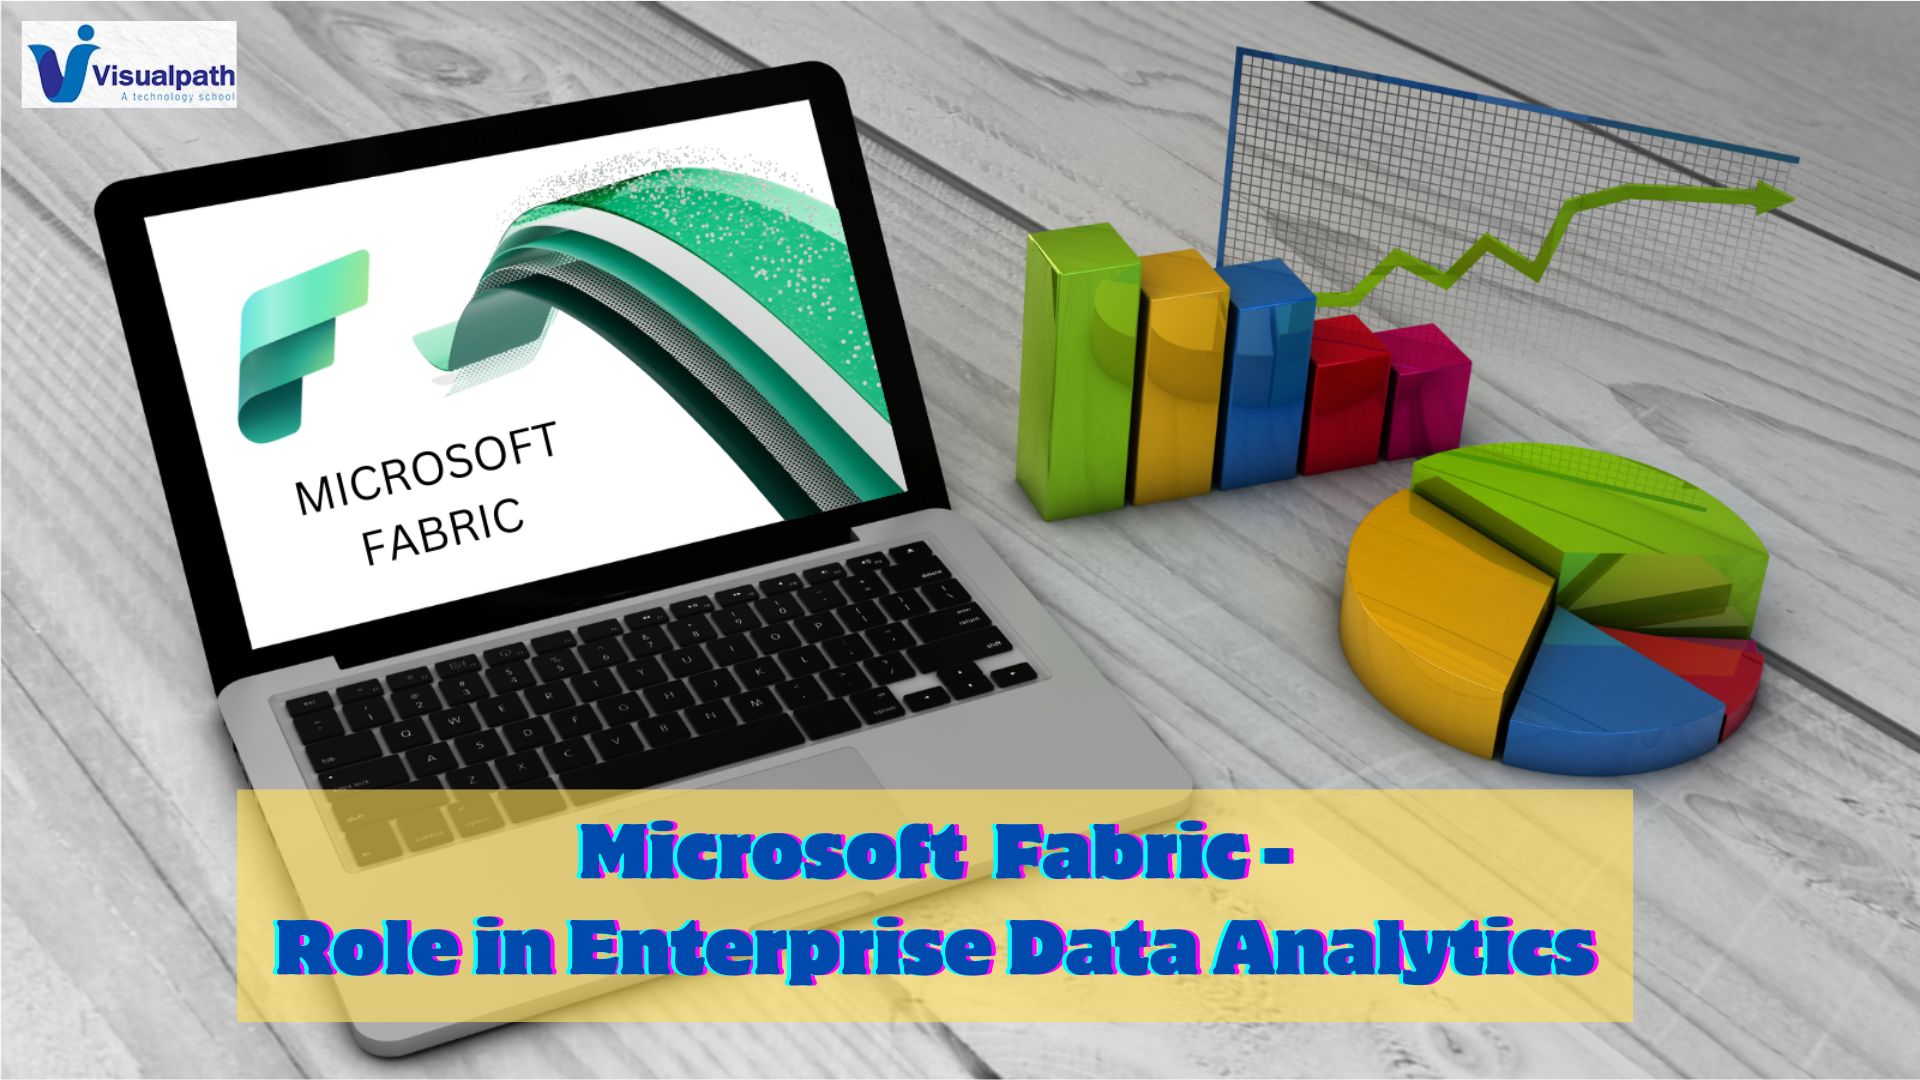 Microsoft Fabric and Its Role in Enterprise Data Analytics